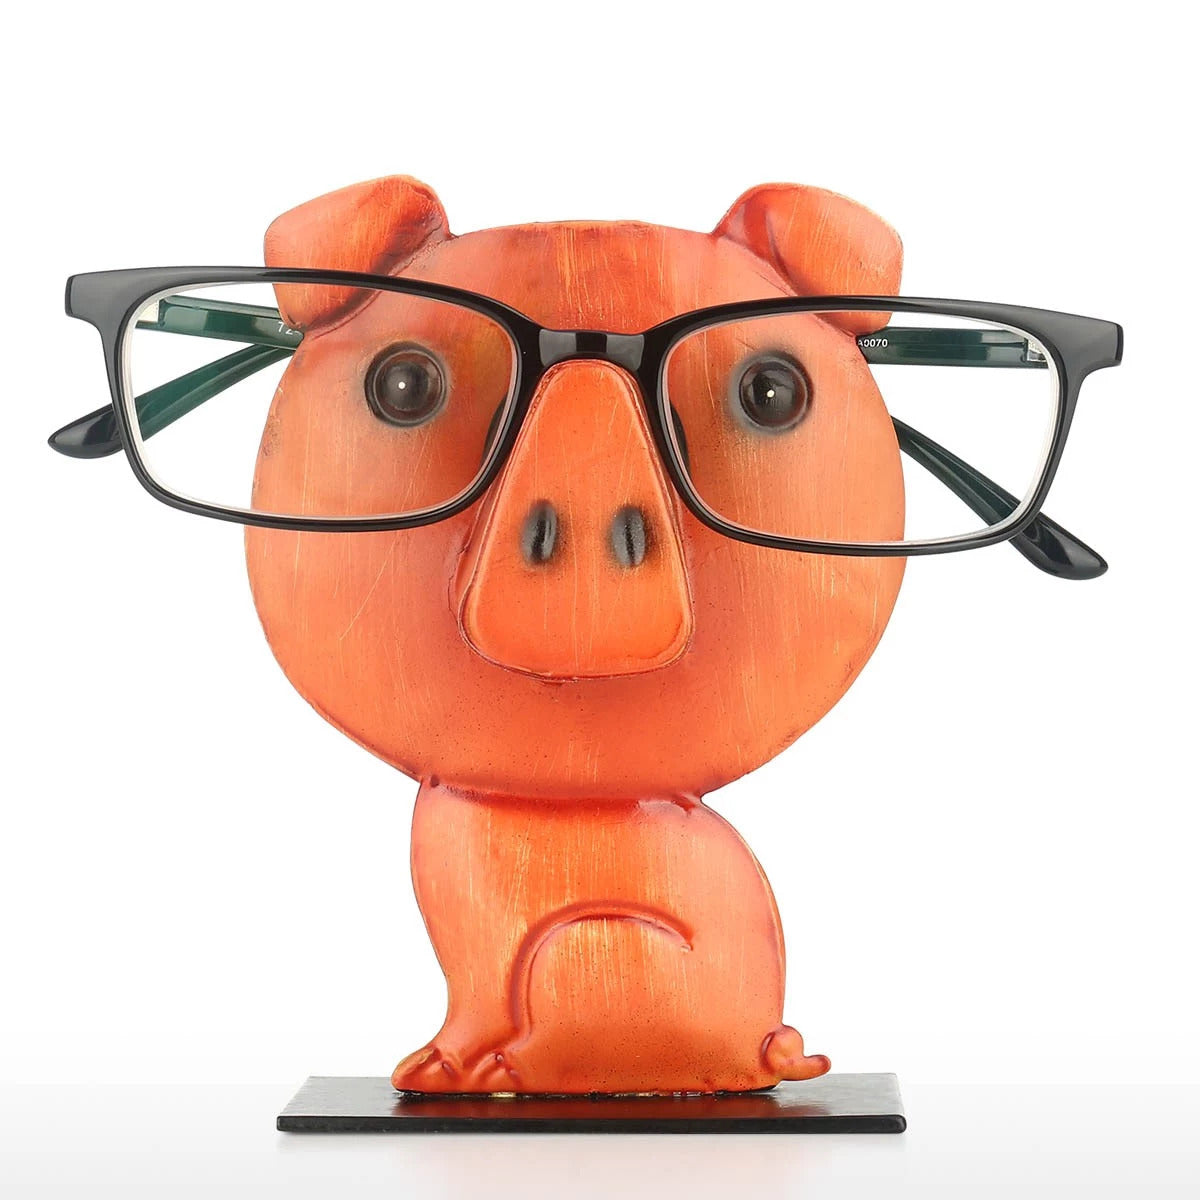 Eyeglass Rack with Orange Animal Pig Figurines to Desktop Accessories and Organizer for Home or Business Life 